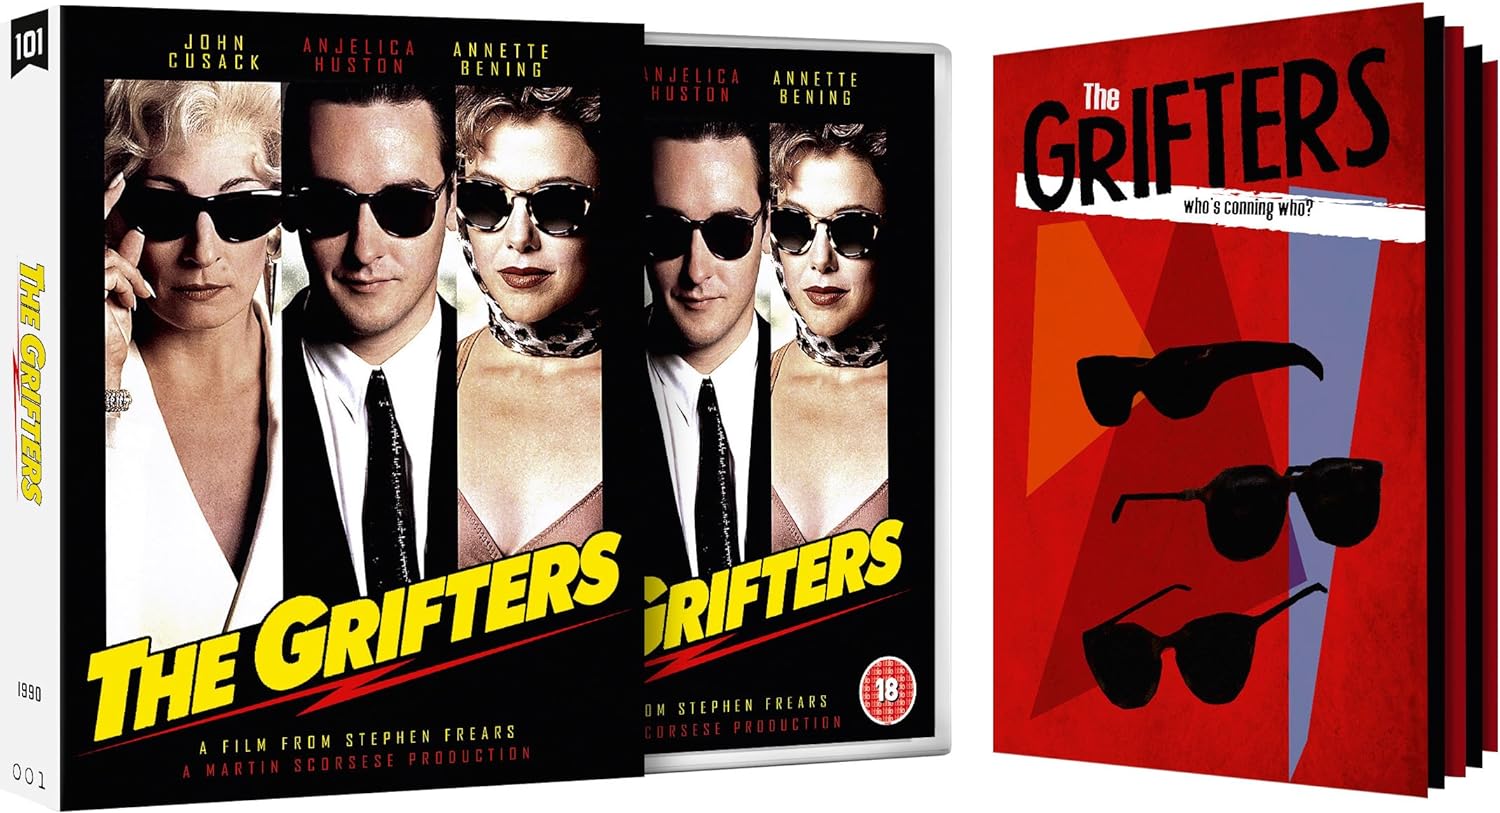 THE GRIFTERS (REGION B IMPORT - LIMITED EDITION) BLU-RAY